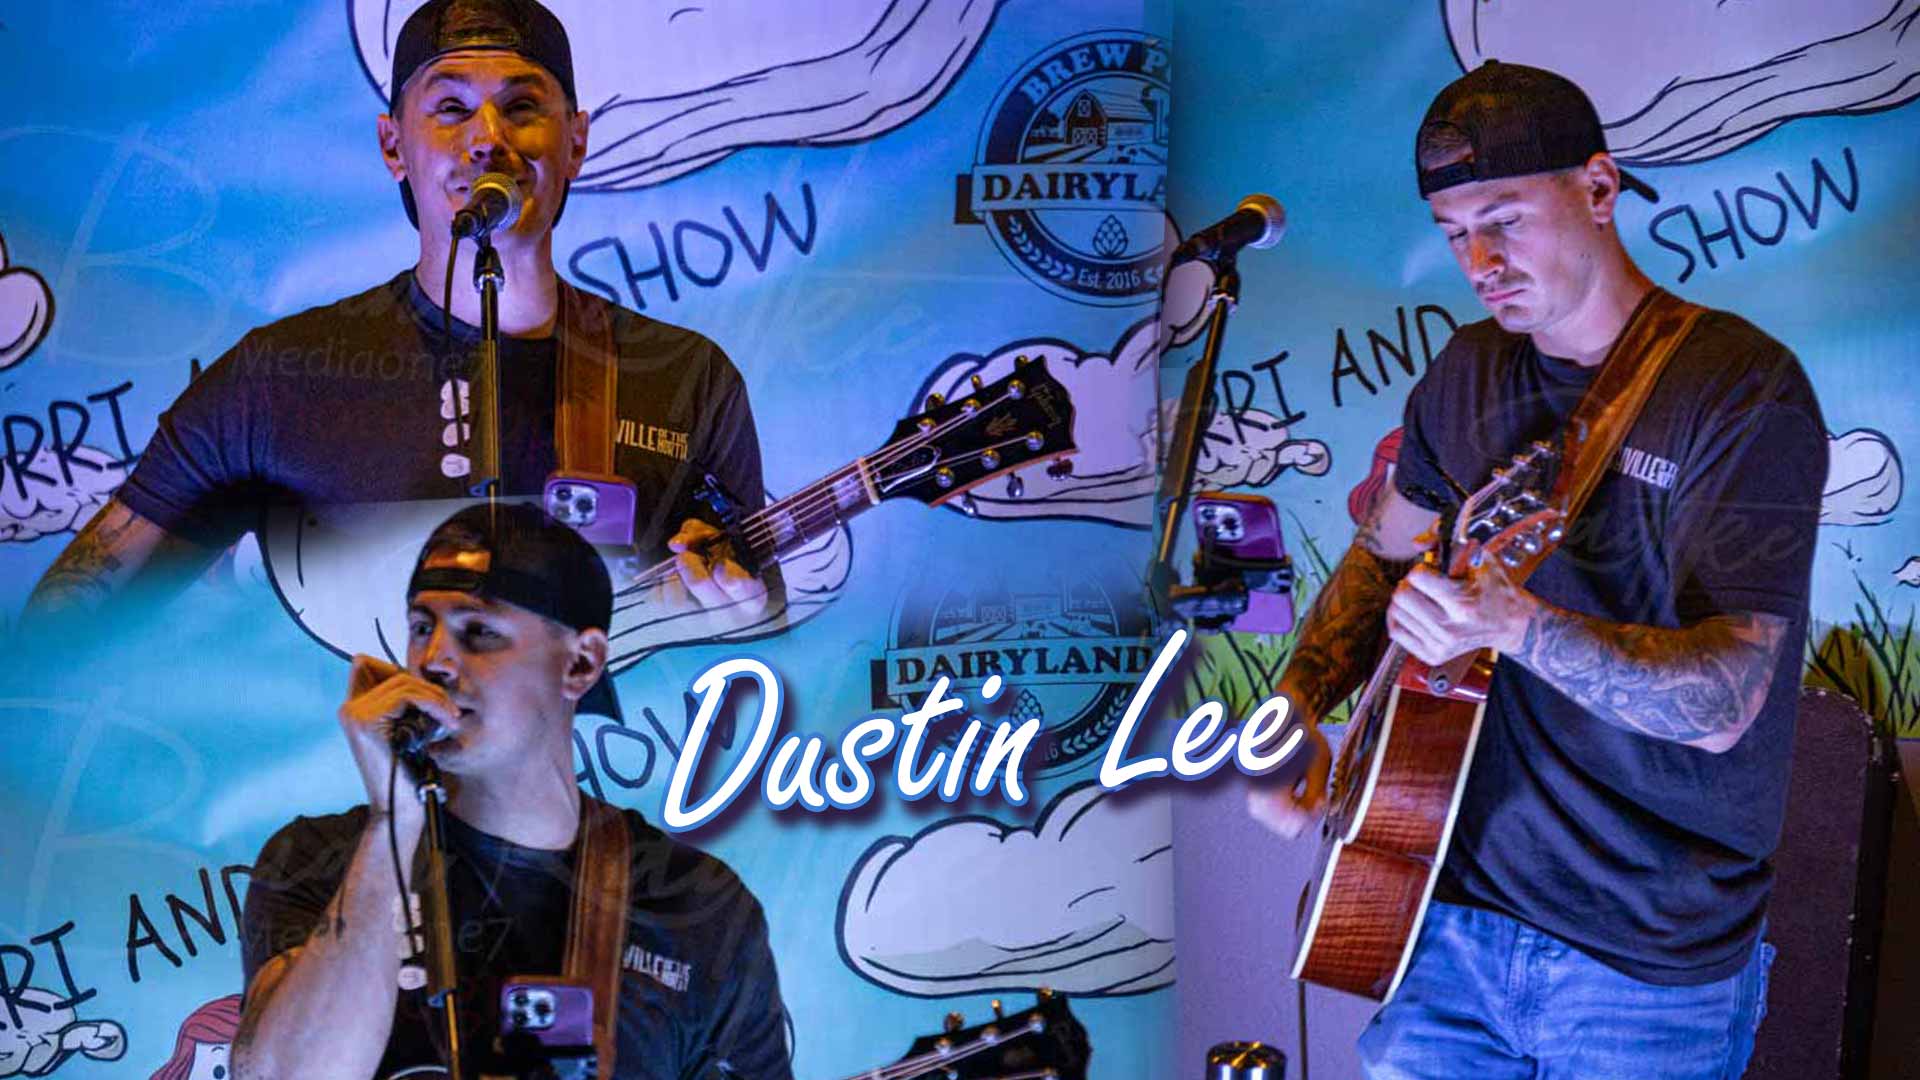 Dustin Lee Acoustic Show at Dairyland Brew Pub in Appleton Wisconsin